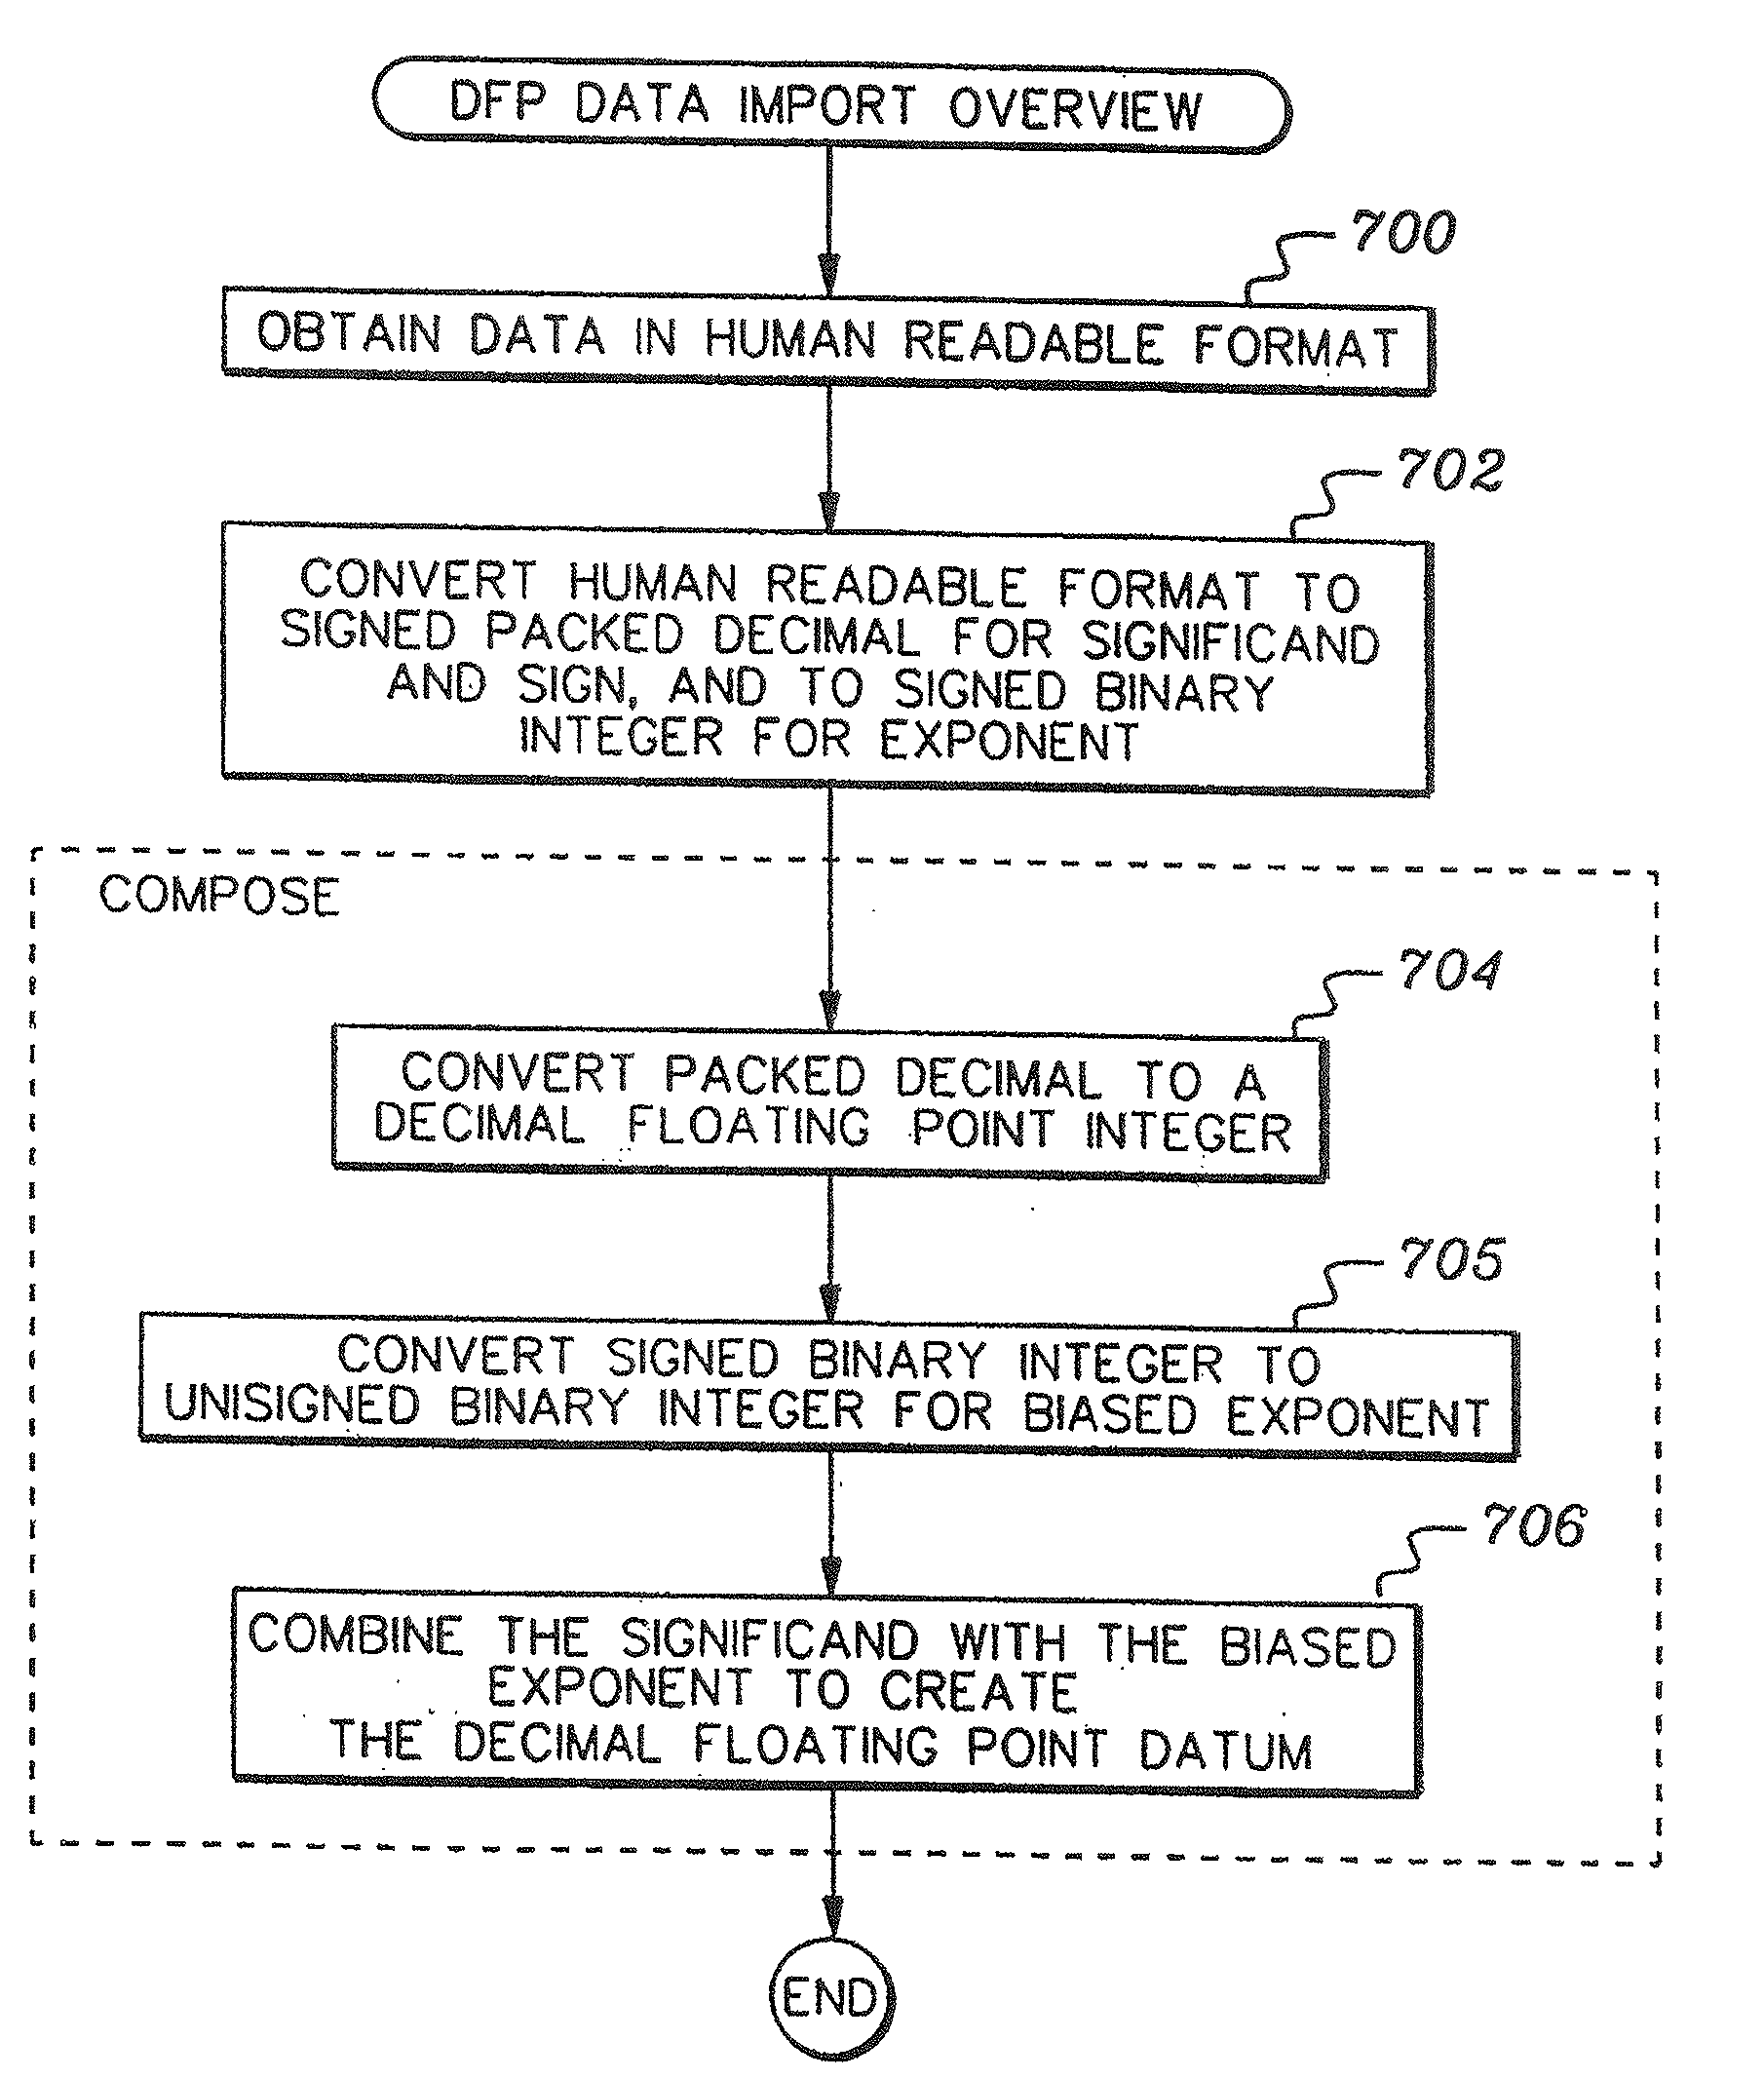 Composition of decimal floating point data, and methods therefor